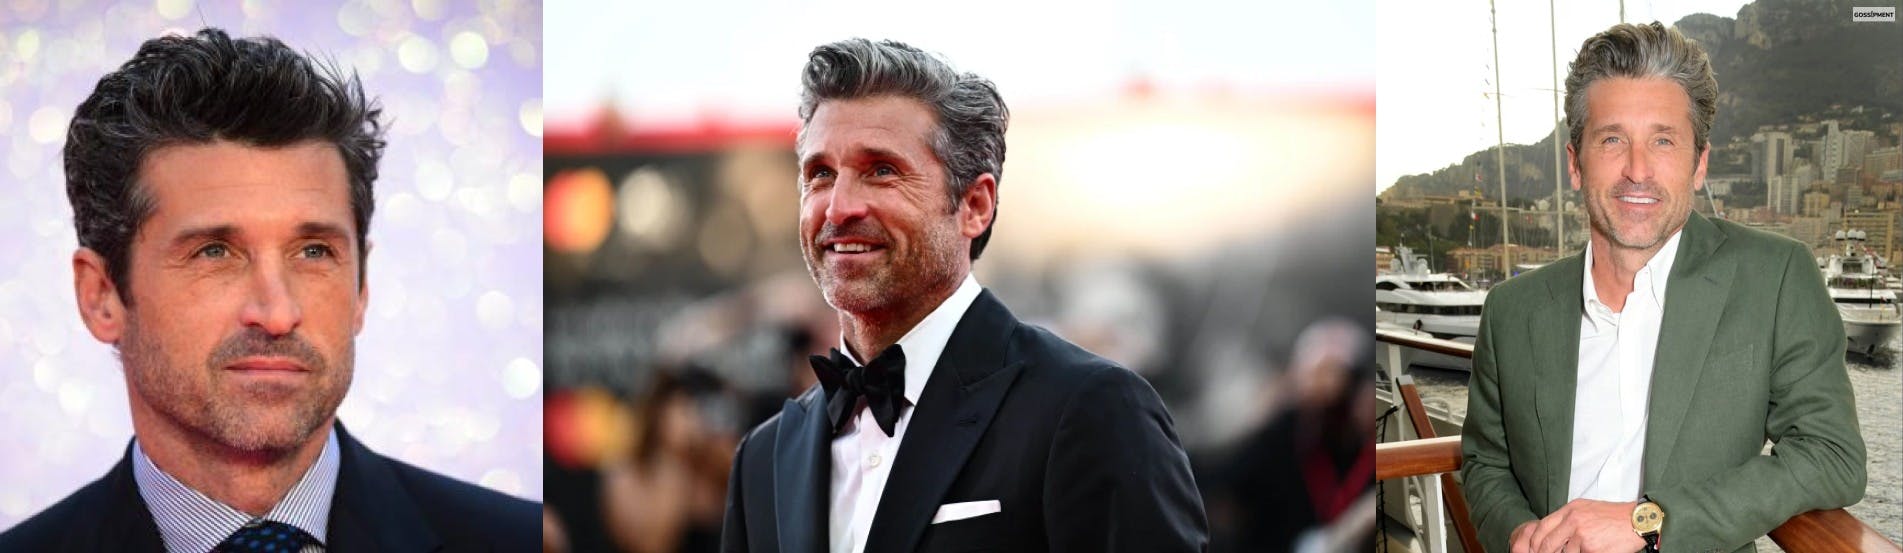 Cover Image for Patrick Dempsey Is FINALLY People’s Sexiest Man Alive: We Are Glad!